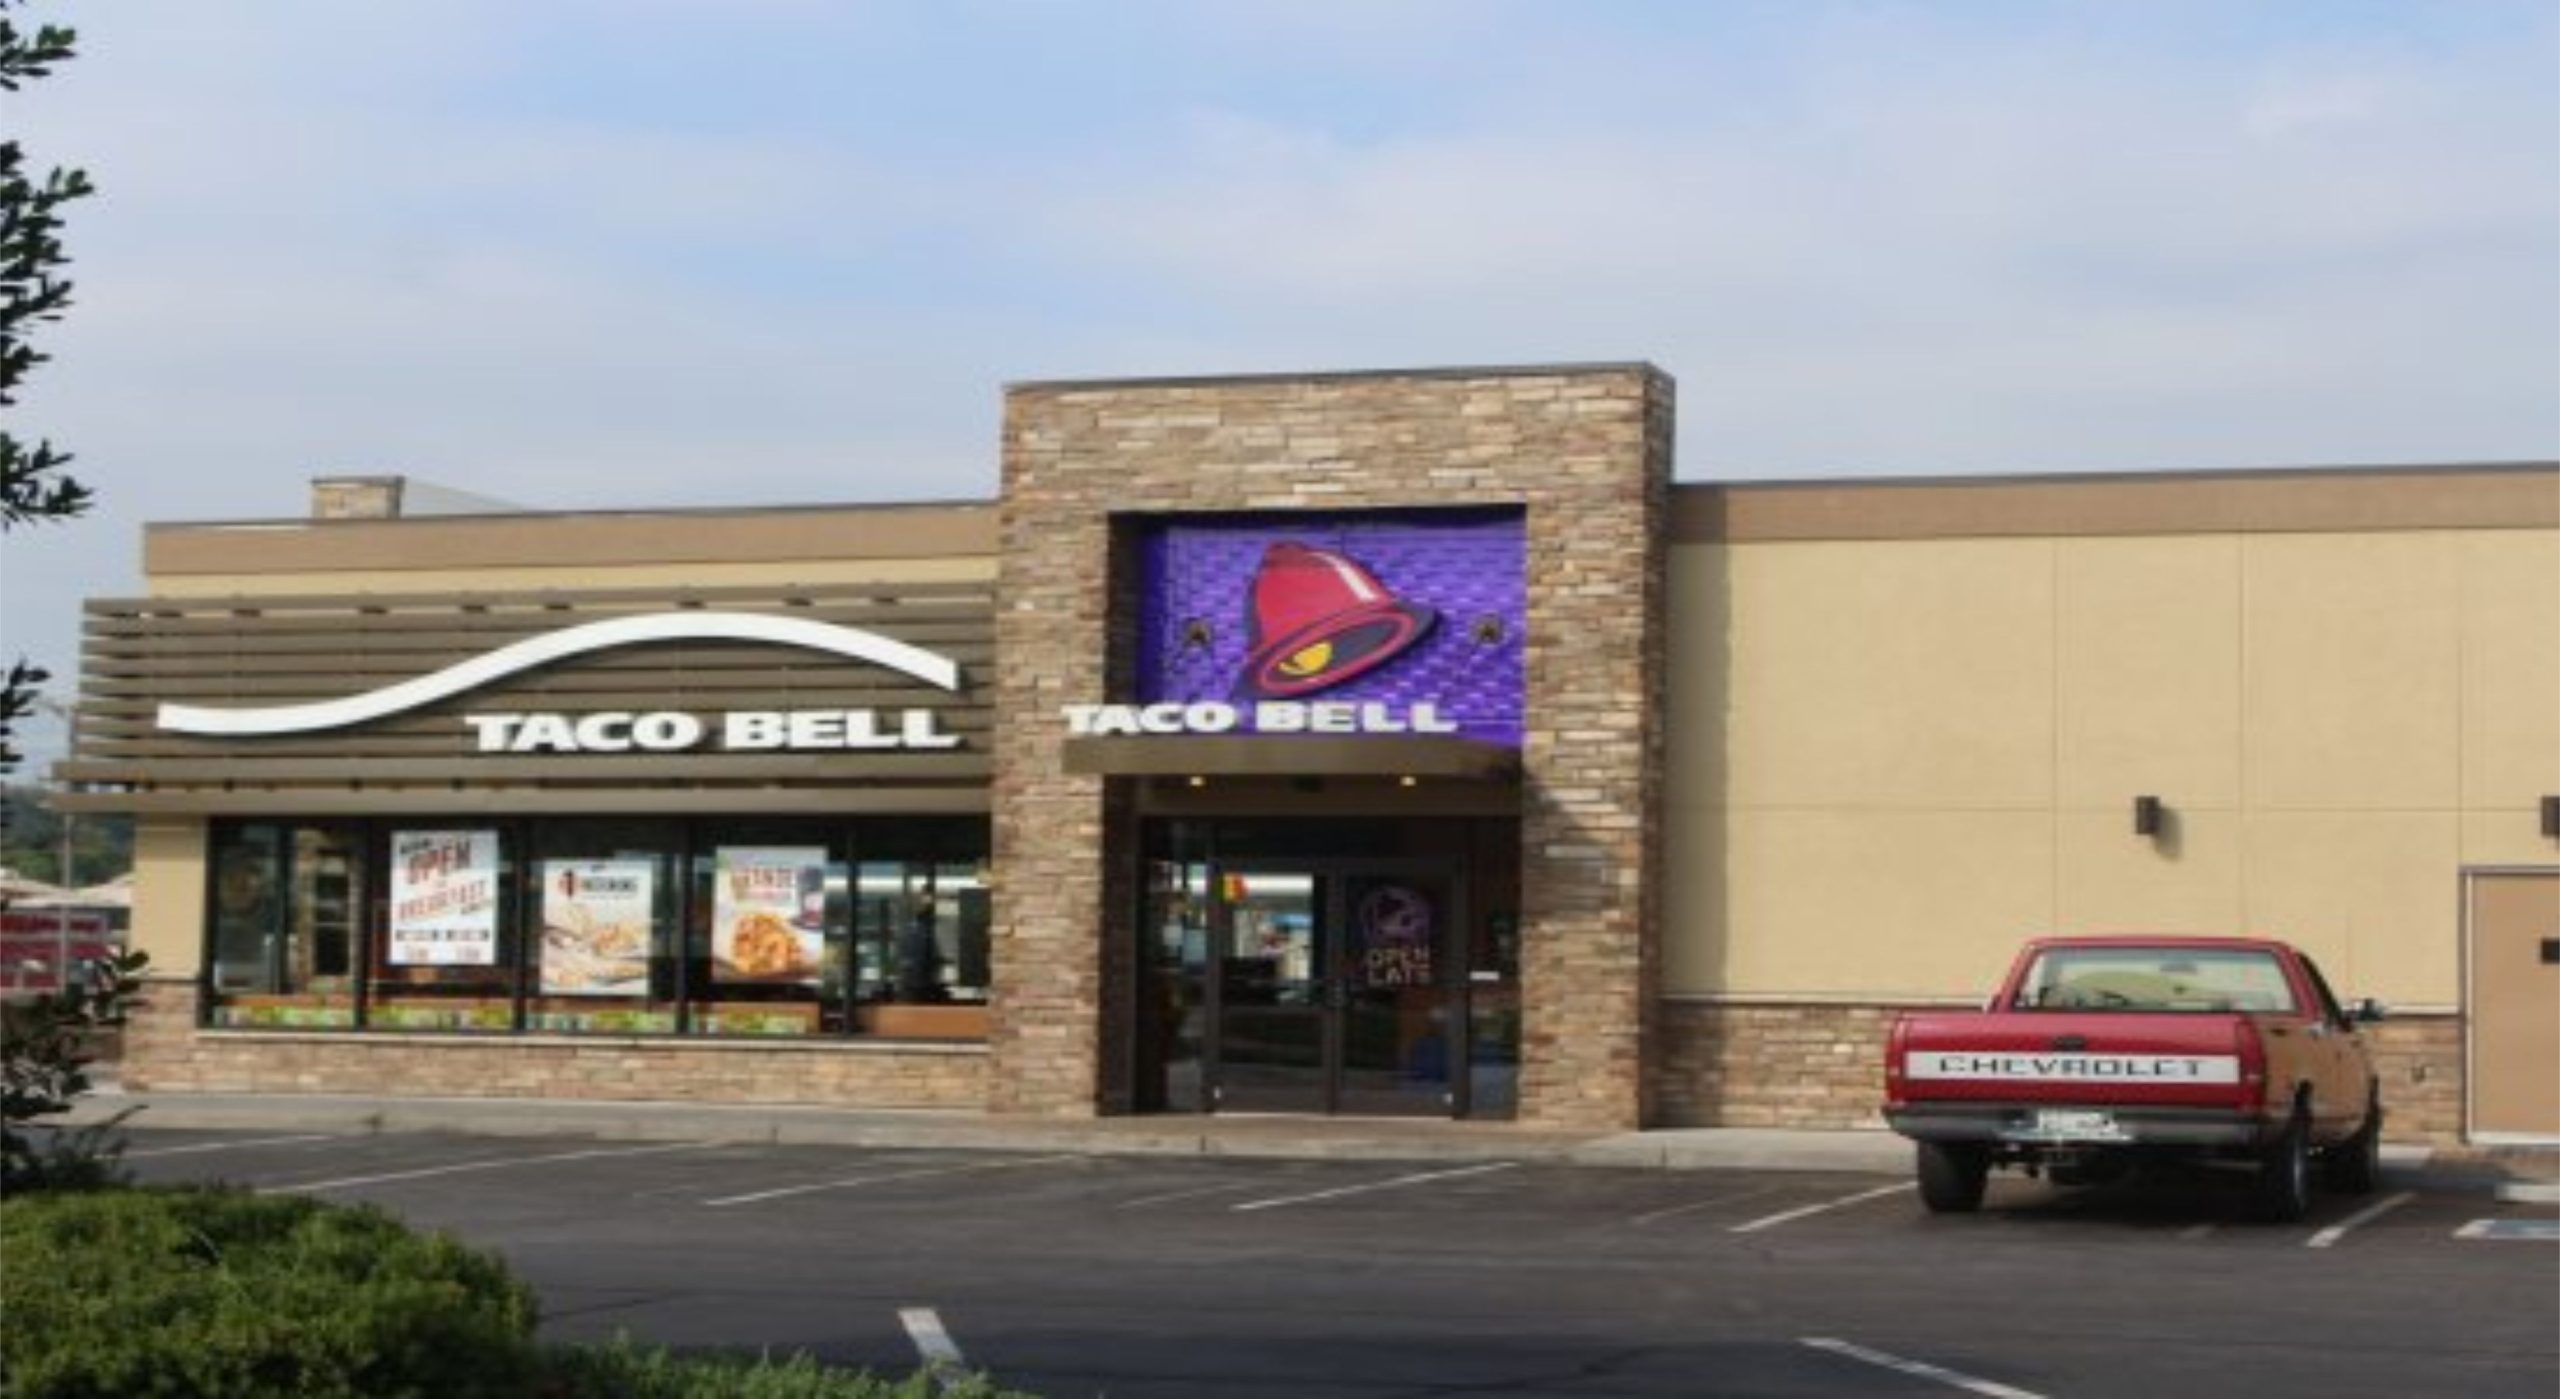 Taco Bell: Over a hundred job opportunities available